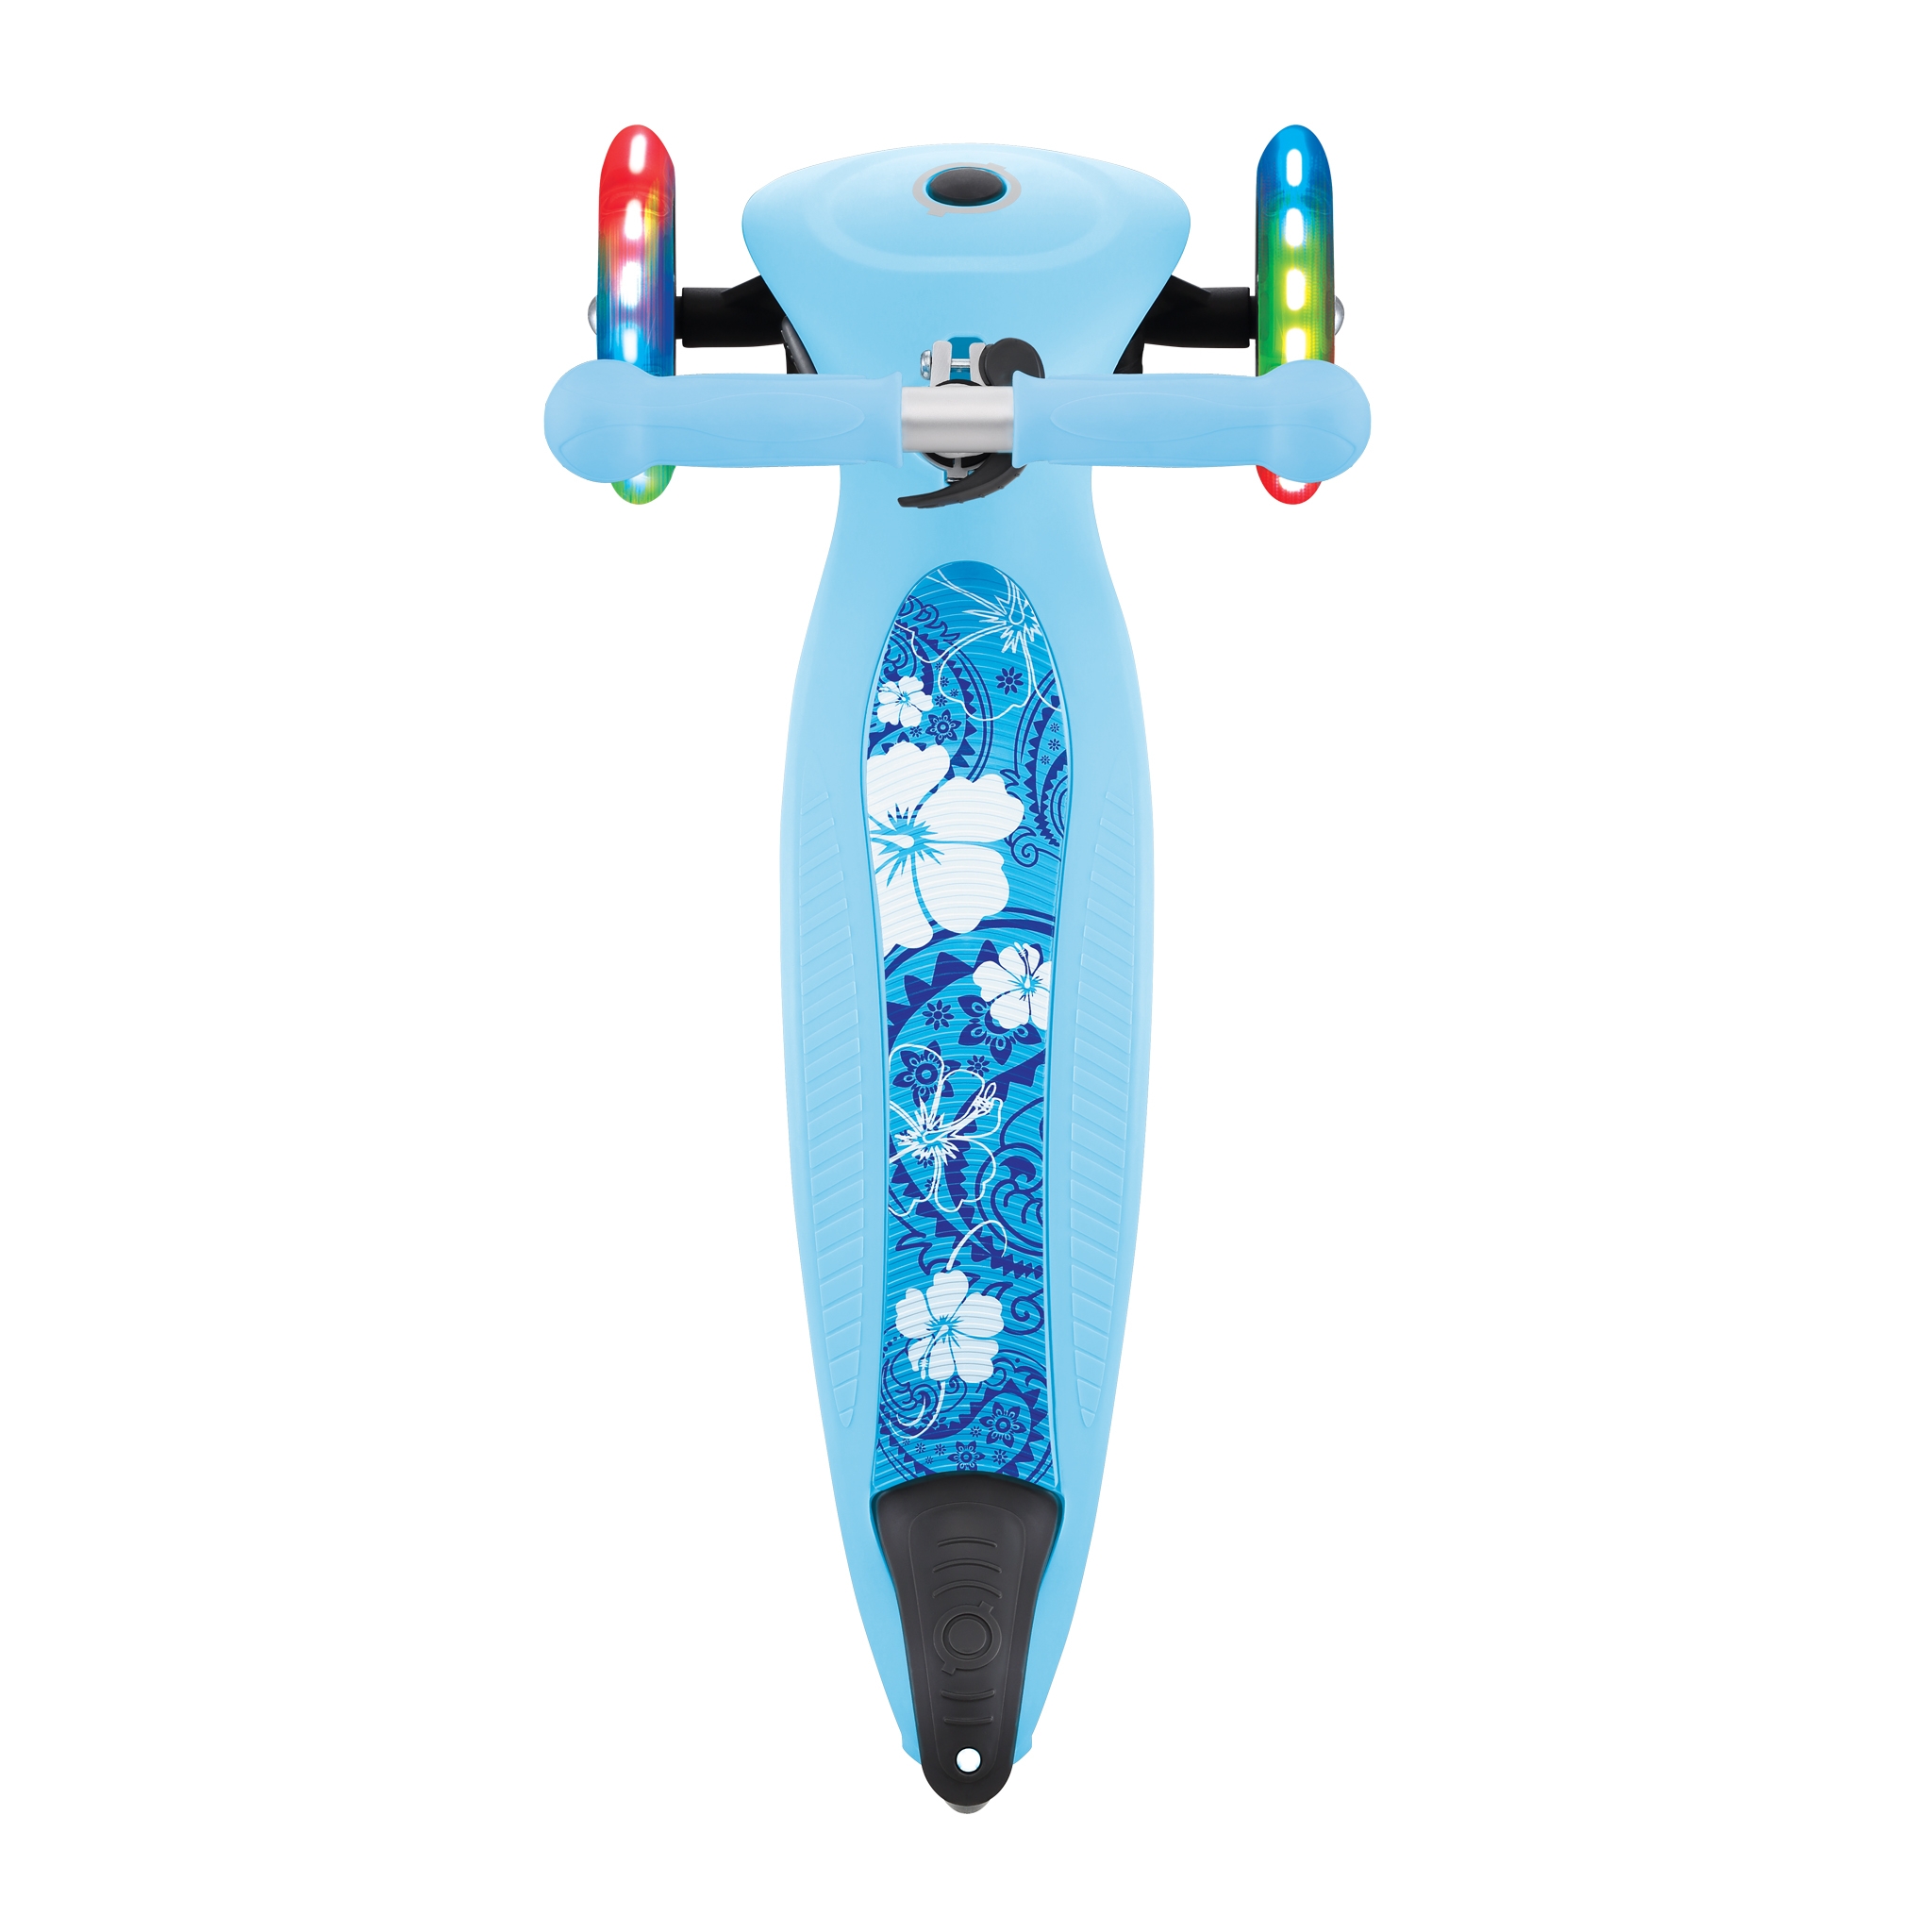 3-wheel-scooter-for-2-year-olds-with-fun-scooter-deck-pattern-Globber-JUNIOR-FOLDABLE-FANTASY-LIGHTS 3